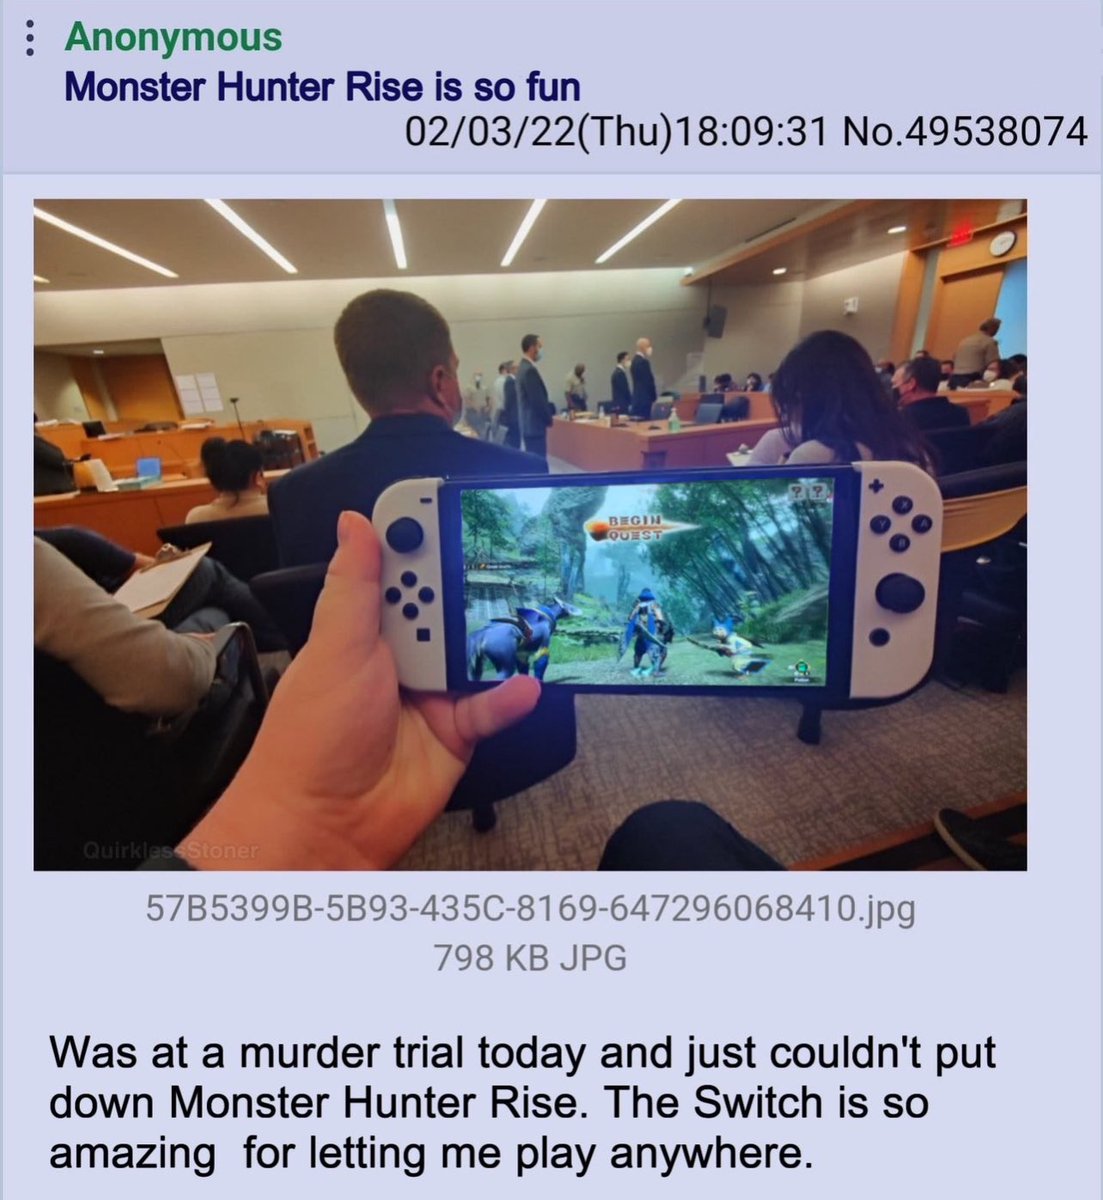 Playing monster hunter at a murder trial is what then